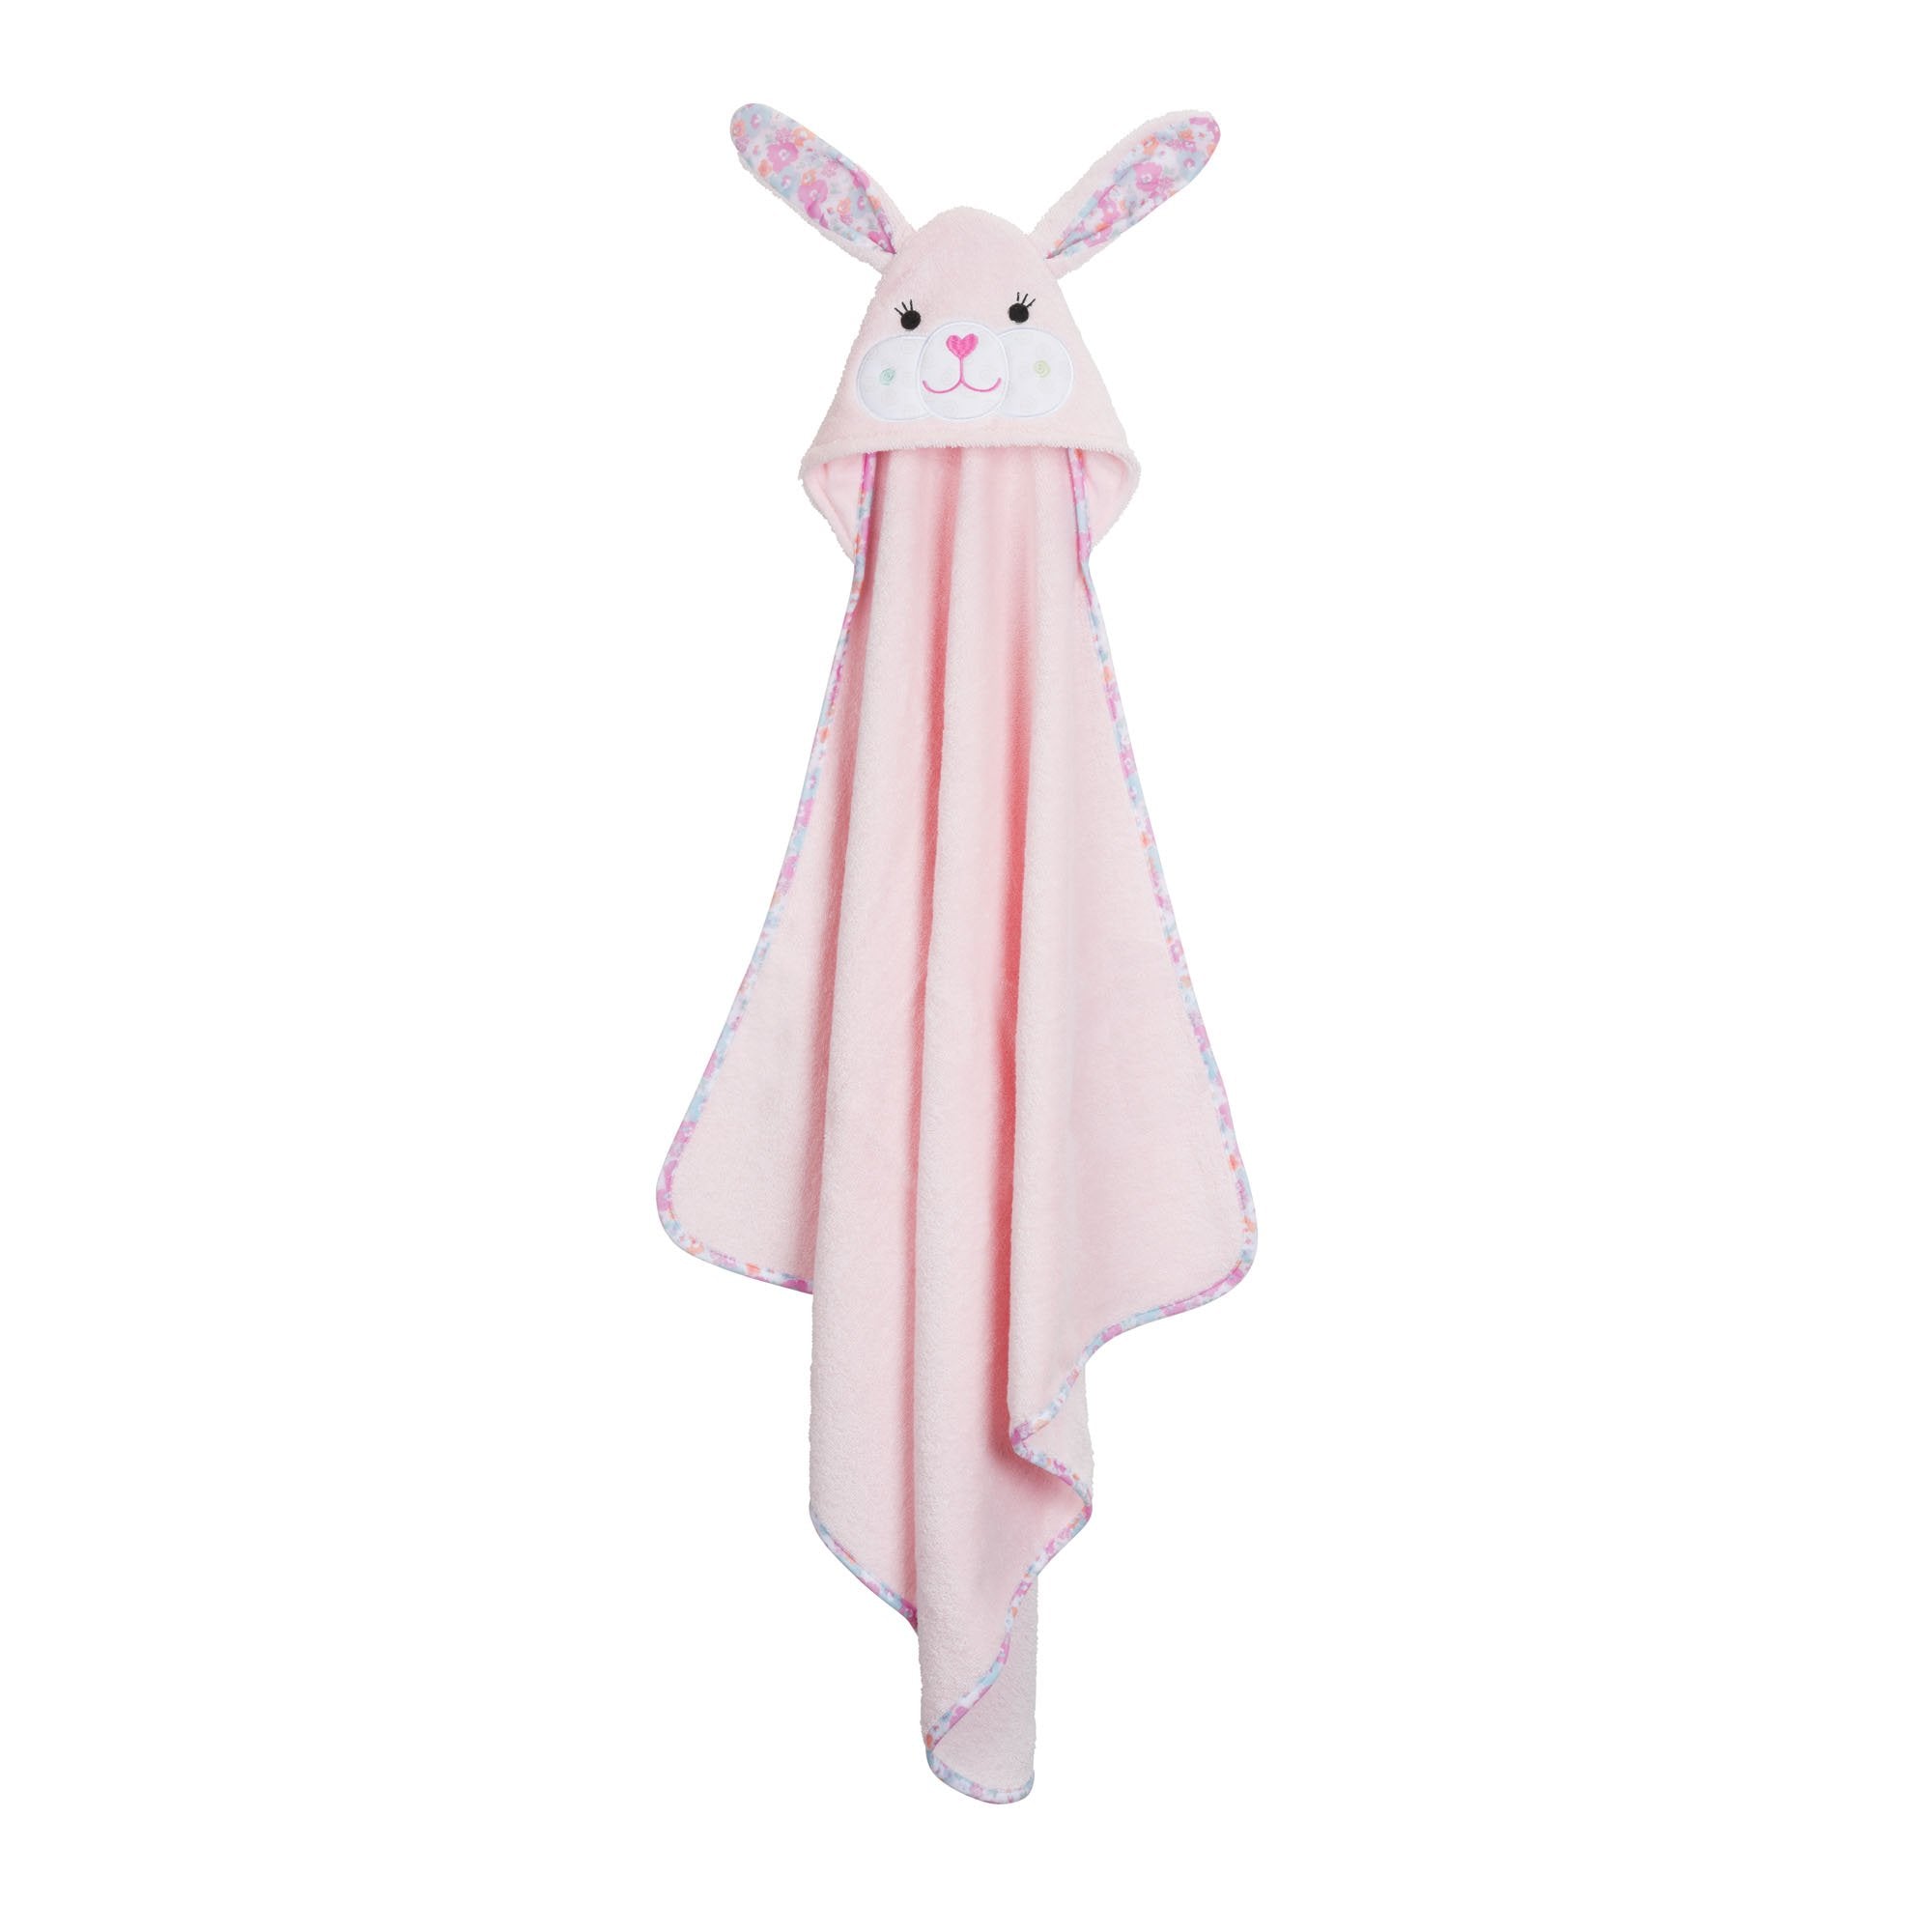 ZOOCCHINI BABY SNOW TERRY HOODED BATH TOWEL - BEATRICE THE BUNNY